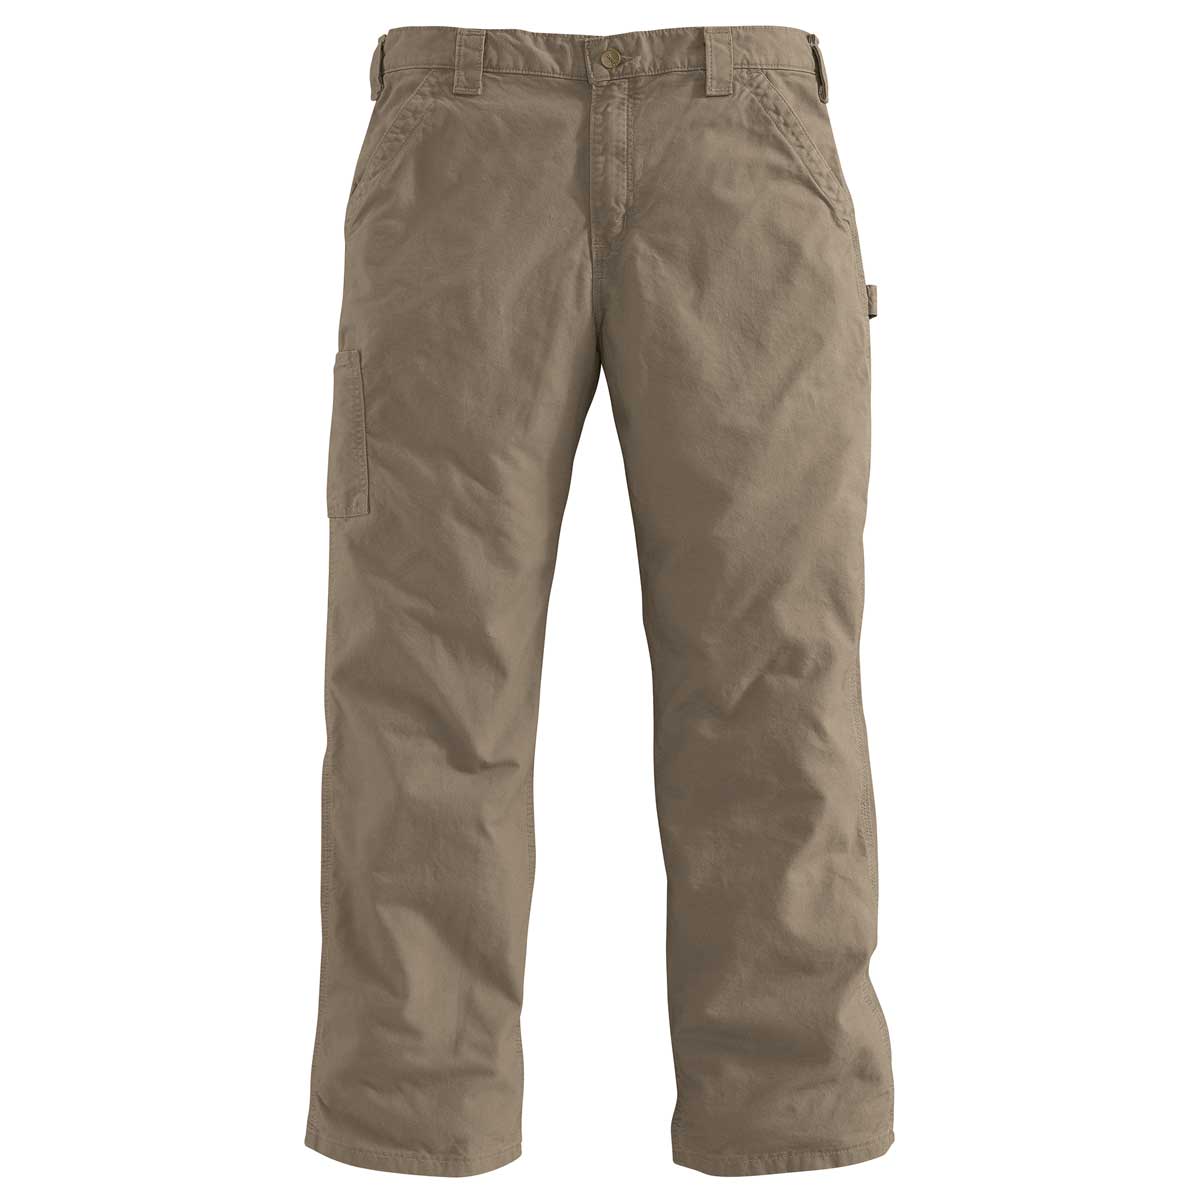 Carhartt Loose Fit Canvas Utility Work Pant, Waist Sizes 40"-50"